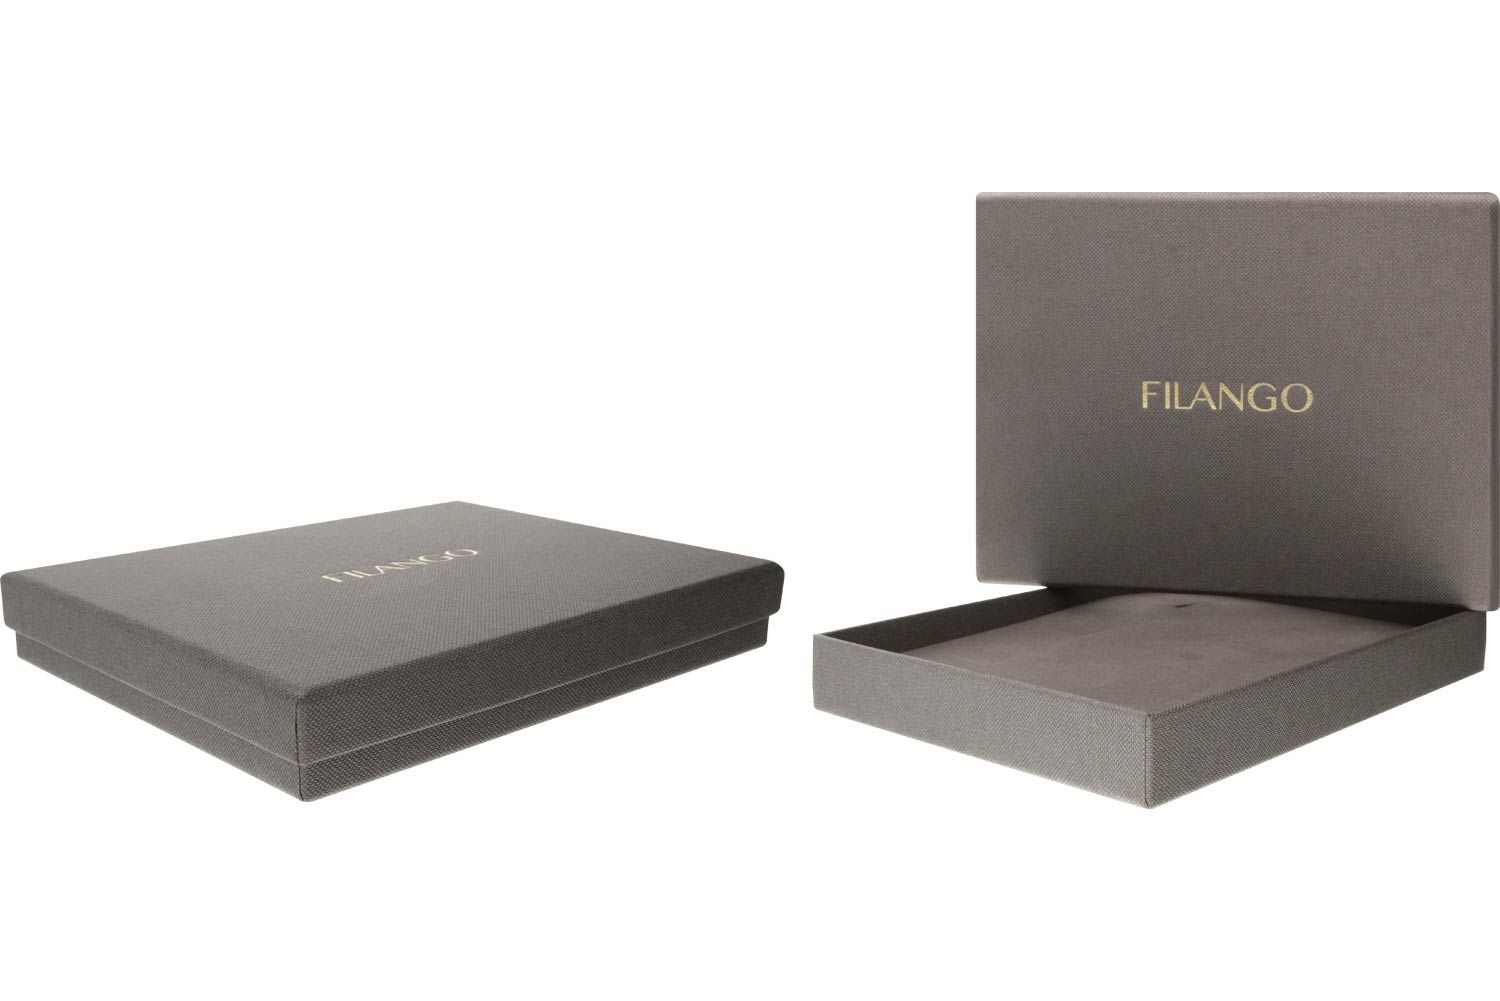 Gift box with foam material + FILANGO imprint - taupe